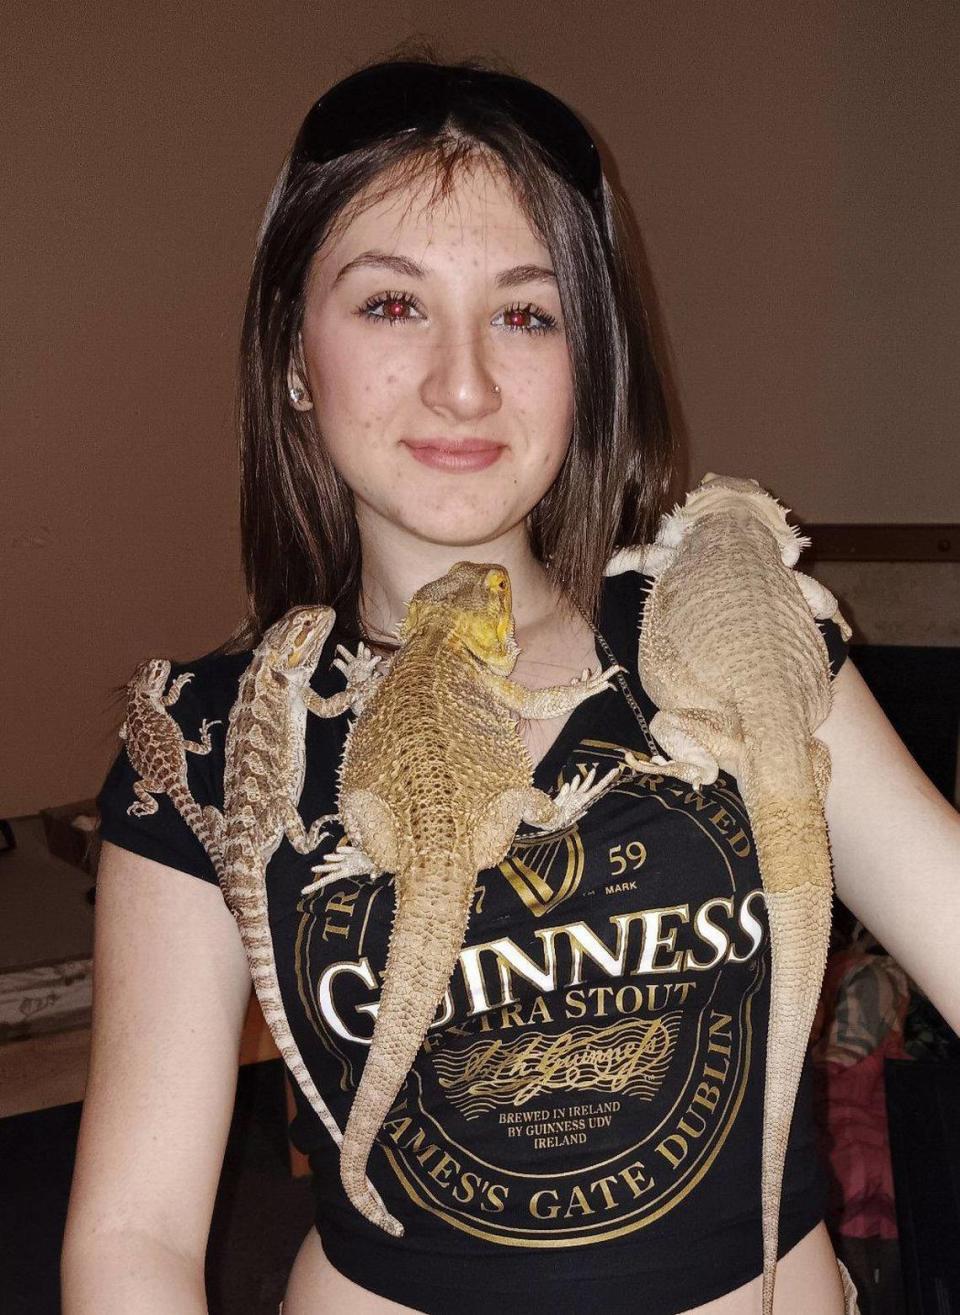 Alyssa, 14, was reported missing by her mother May 21. One of the family’s pet bearded dragons, Juliette (middle right), went missing with Alyssa